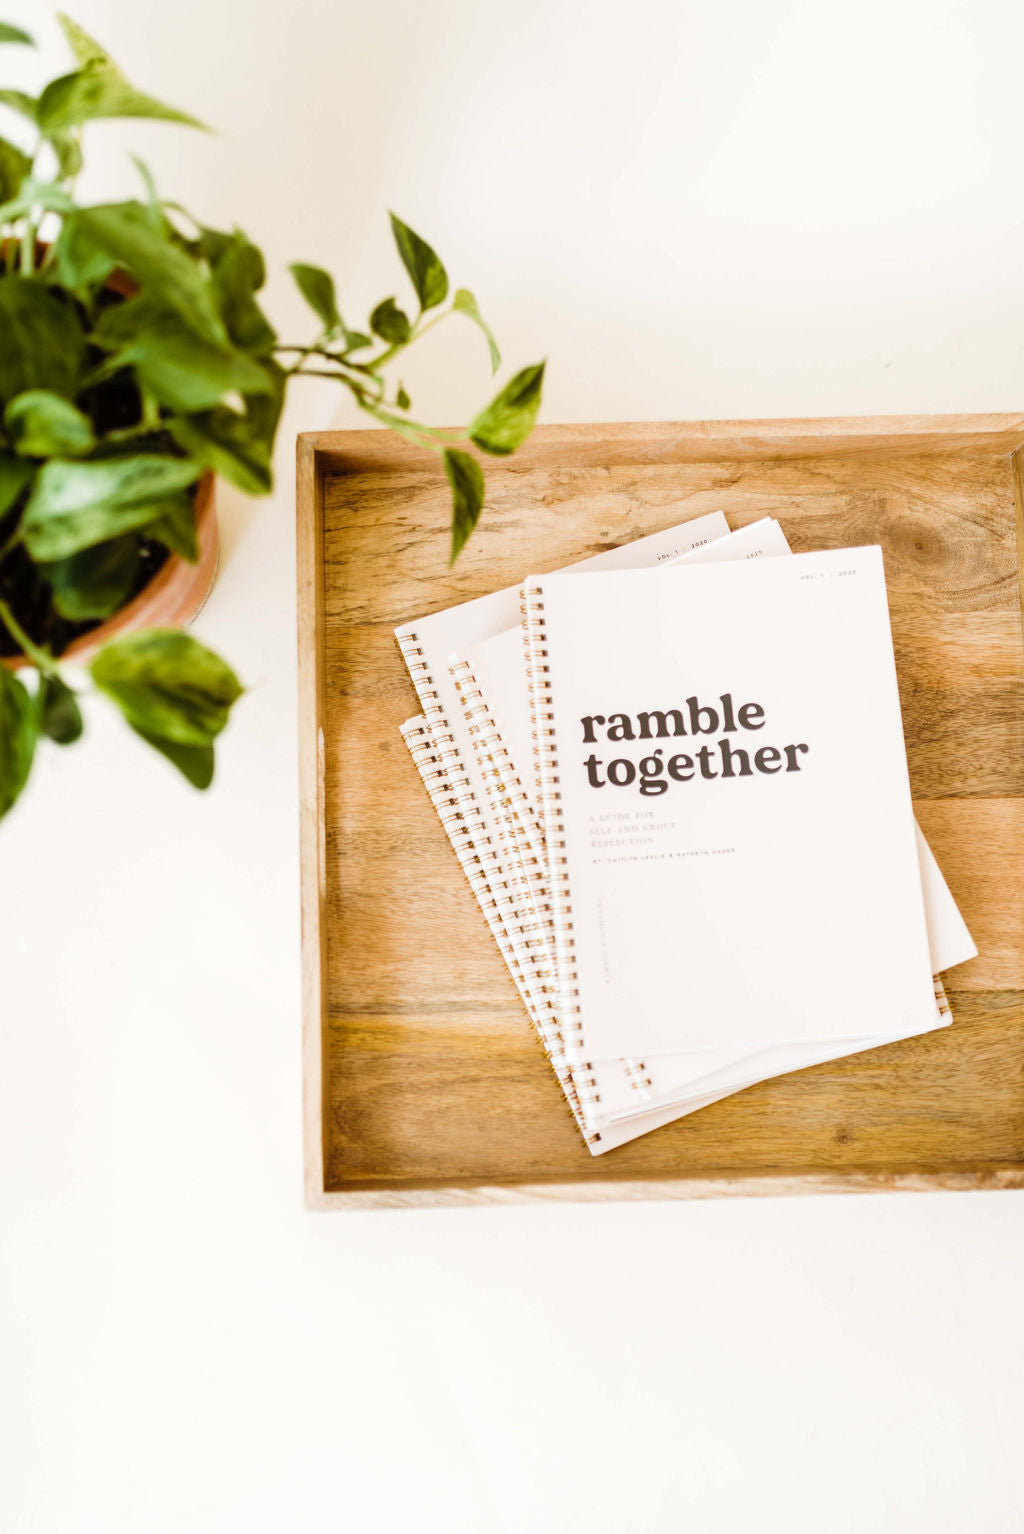 Ramble Together is a six chapter study that gently guides you out of the noise of expectations and social media and back to yourself and face-to-face community. Ramble & Co. is a family owned business. Shop at shop.rambleandcompany.com or visit our store in Wichita Falls, Texas || small batch/ hand printed tees + fine art prints | your source of encouragement + inspiration.